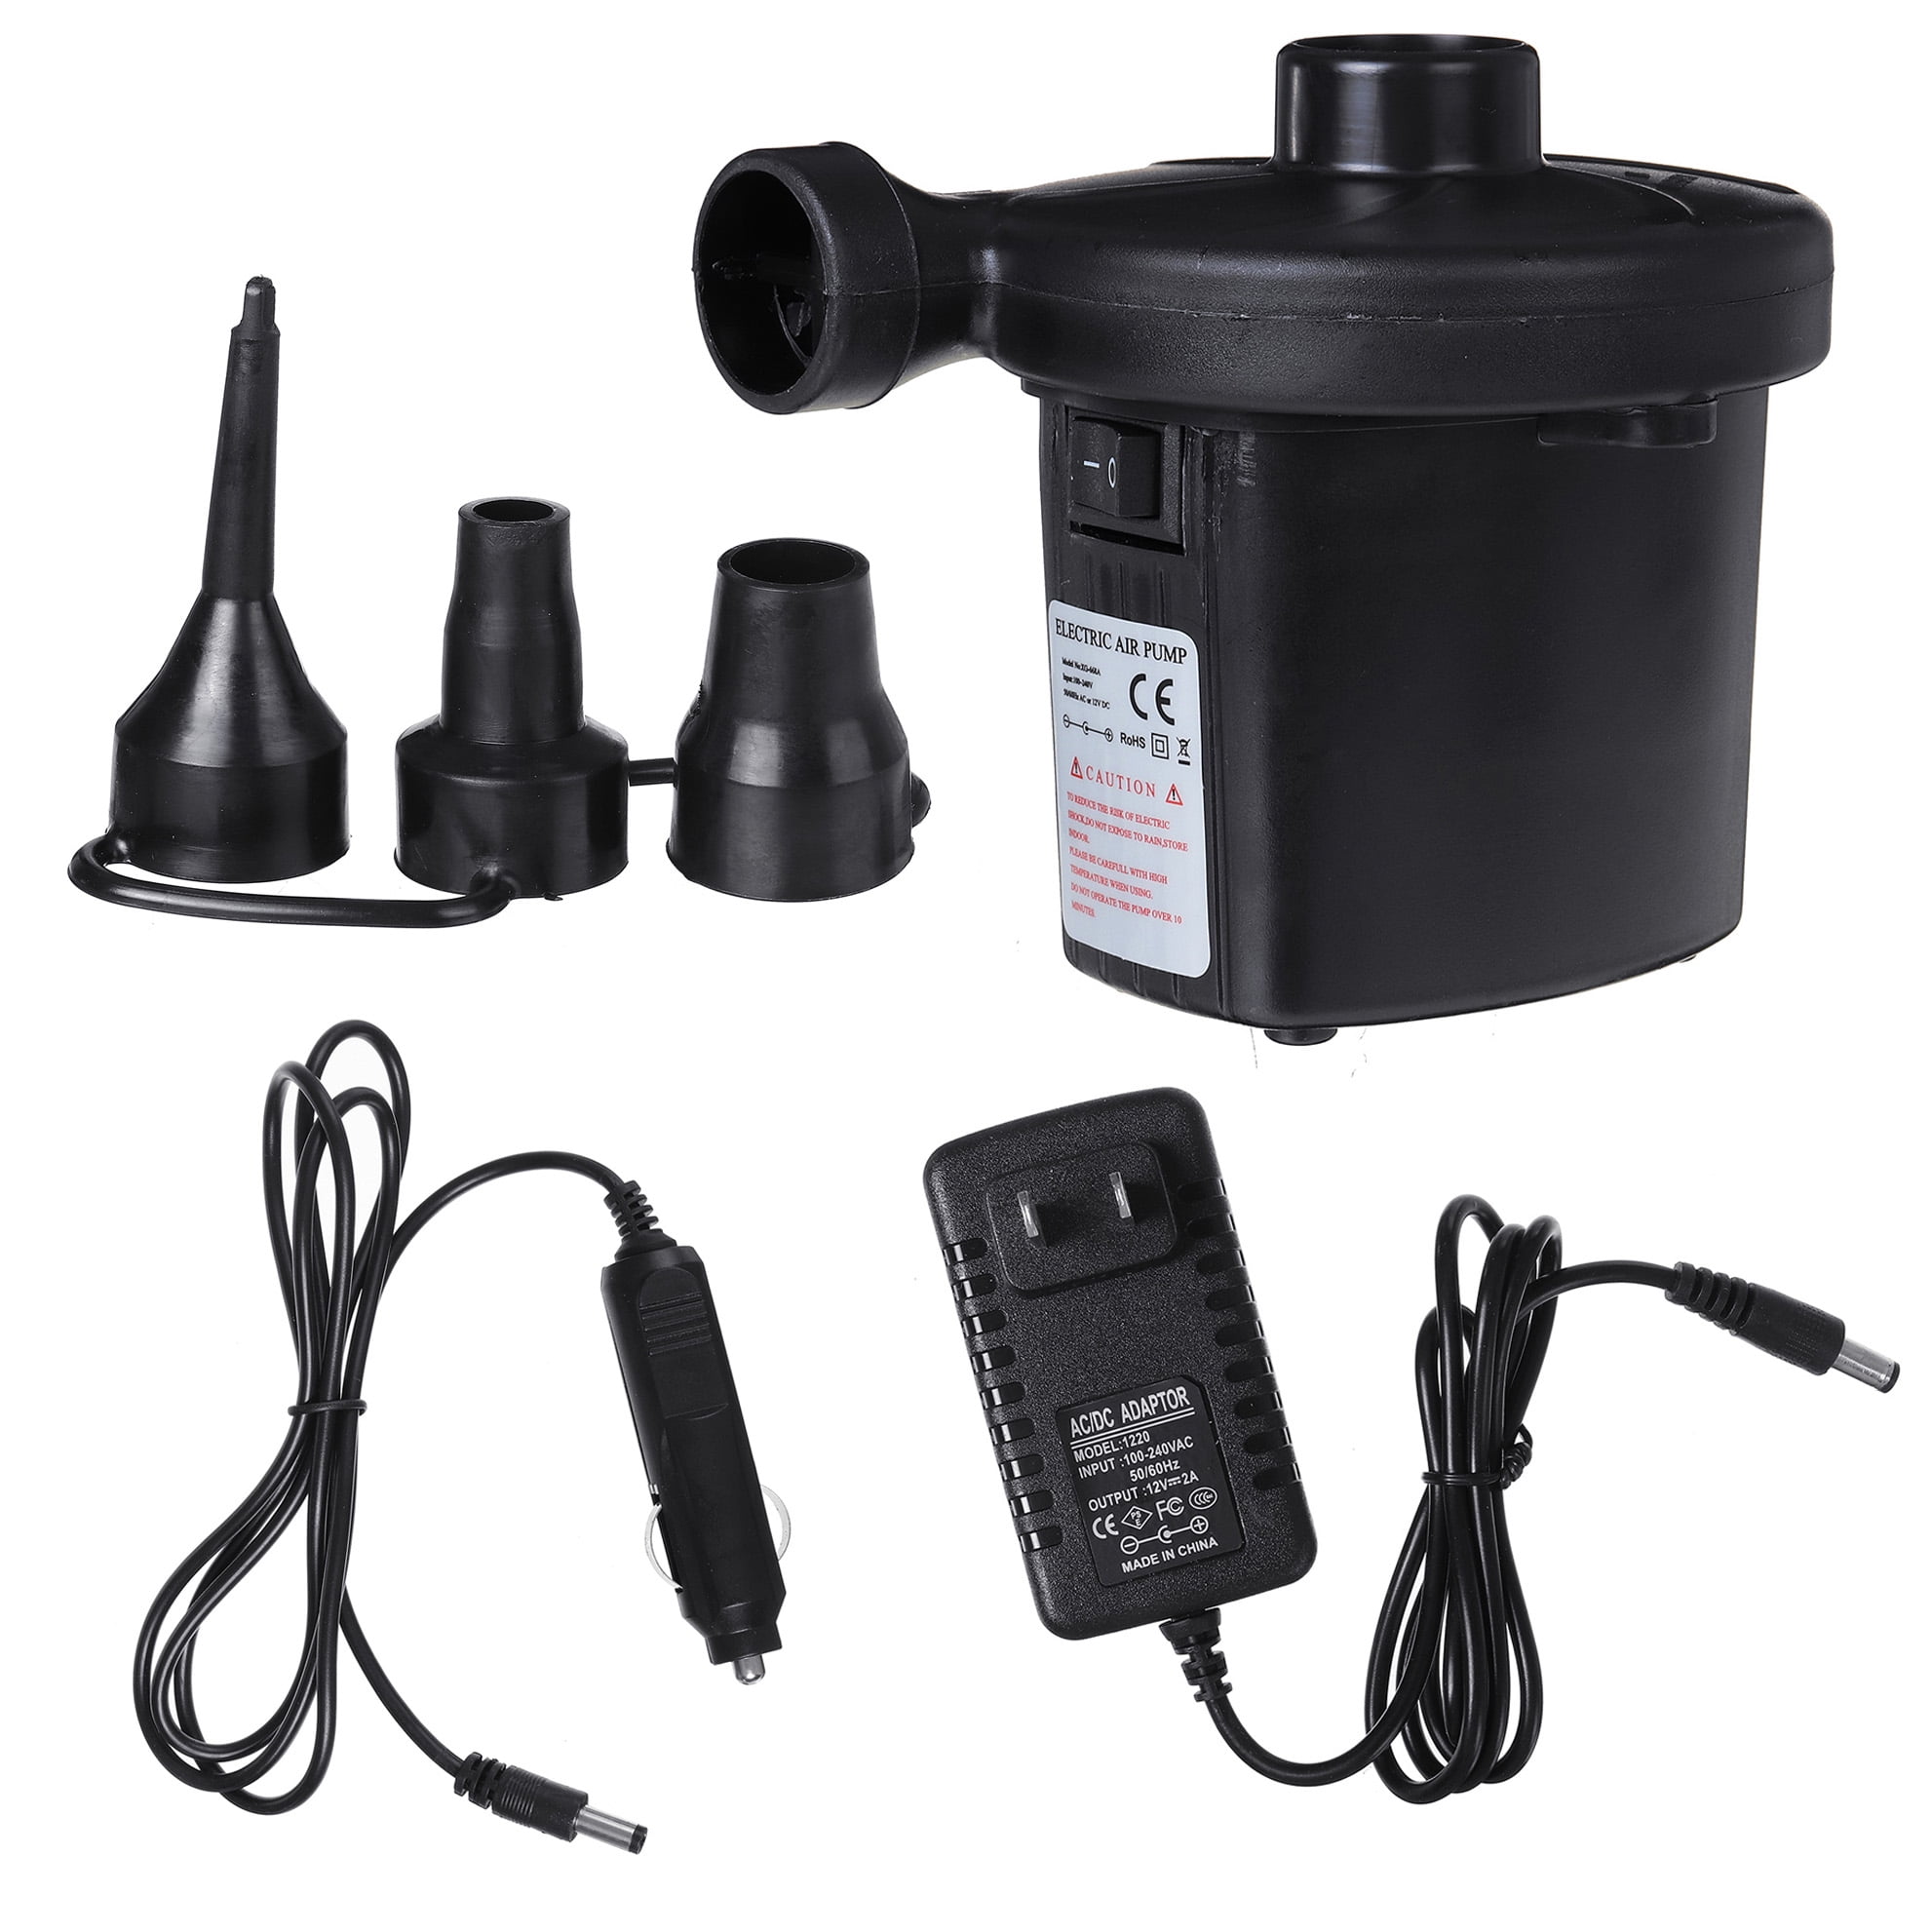 Mains DC Electric Air Pump Inflator Inflatables Camping Pool Raft Boat Airbed 